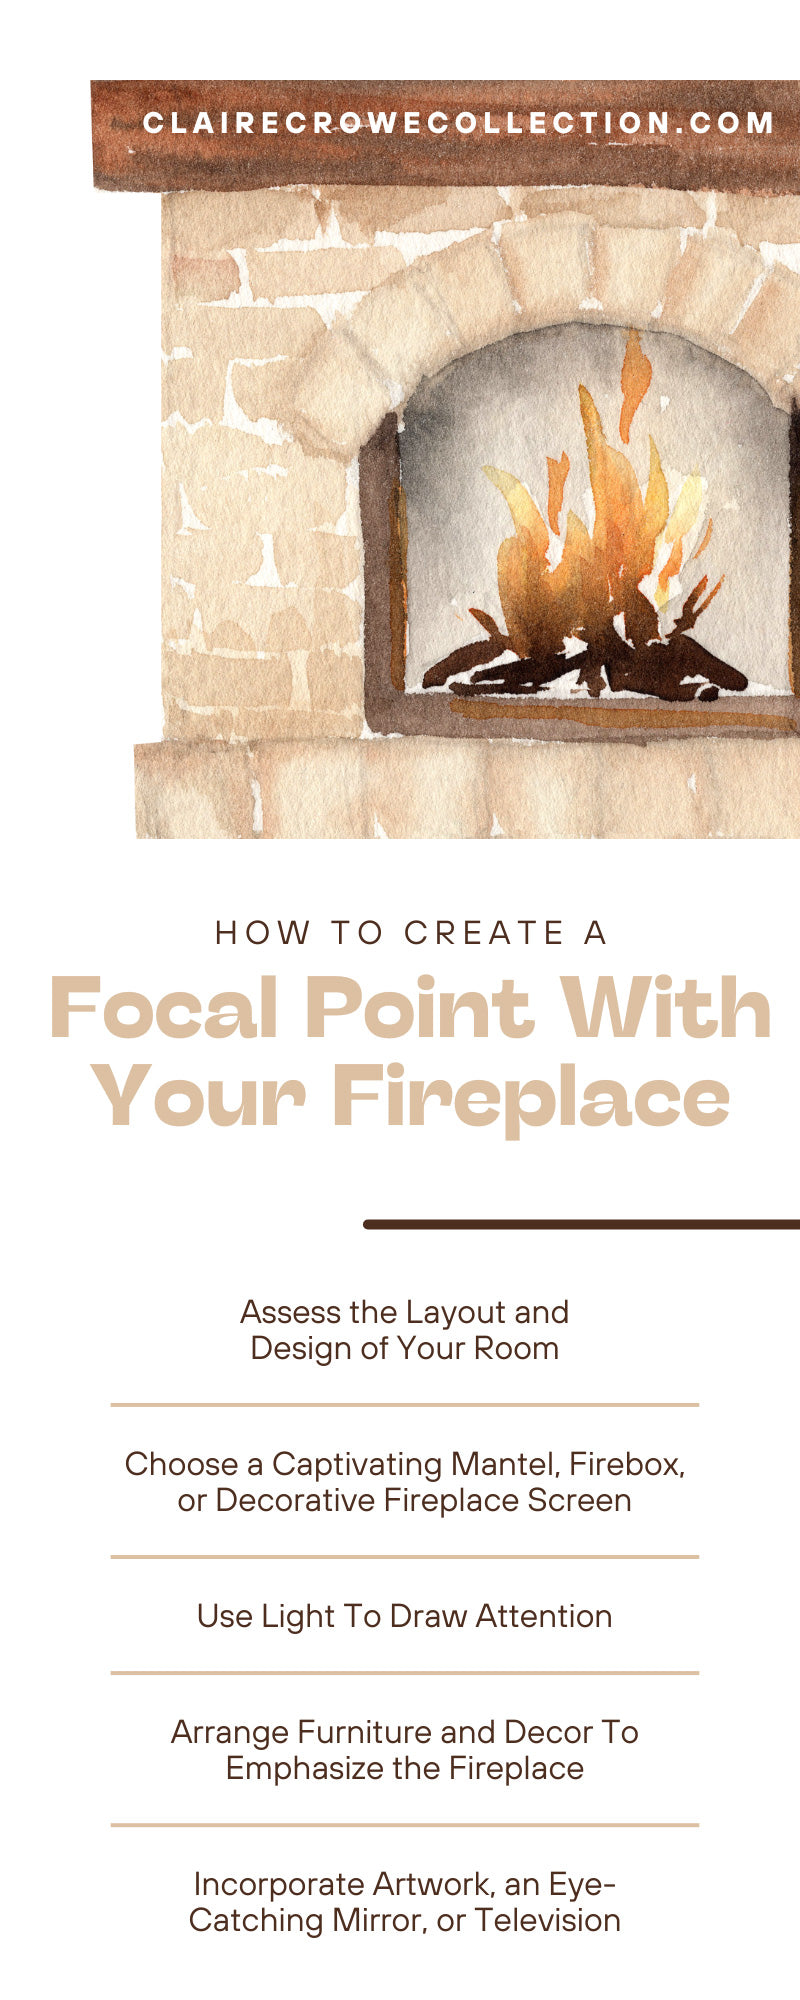 How To Create a Focal Point With Your Fireplace